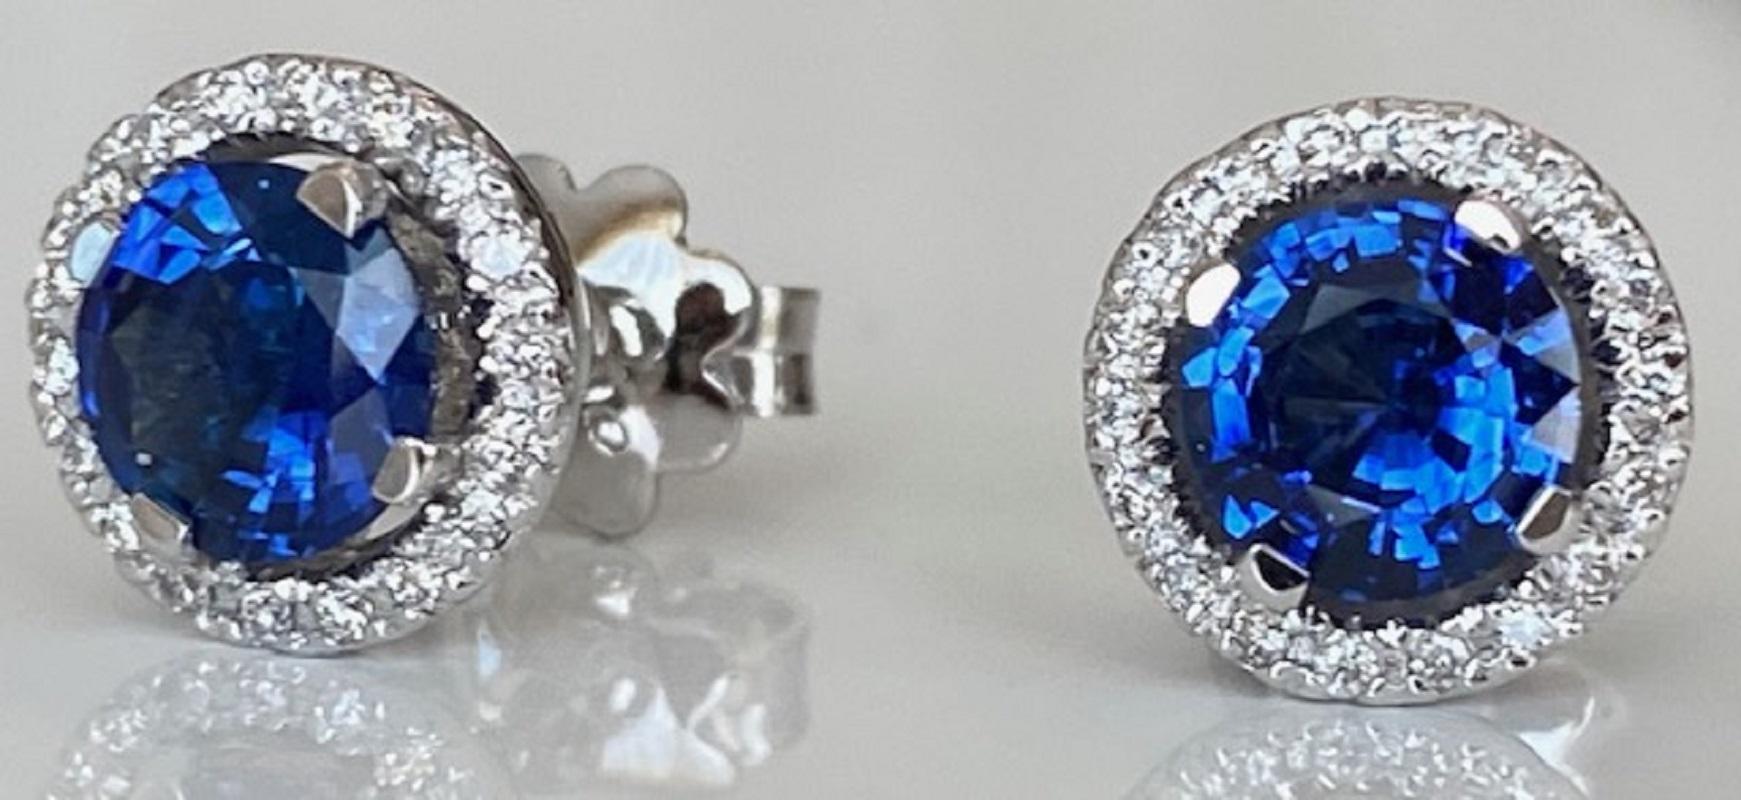 ALGT Certified 18 Kt. White Gold Earrings with 1.62 Ct Sapphires and Diamonds For Sale 1